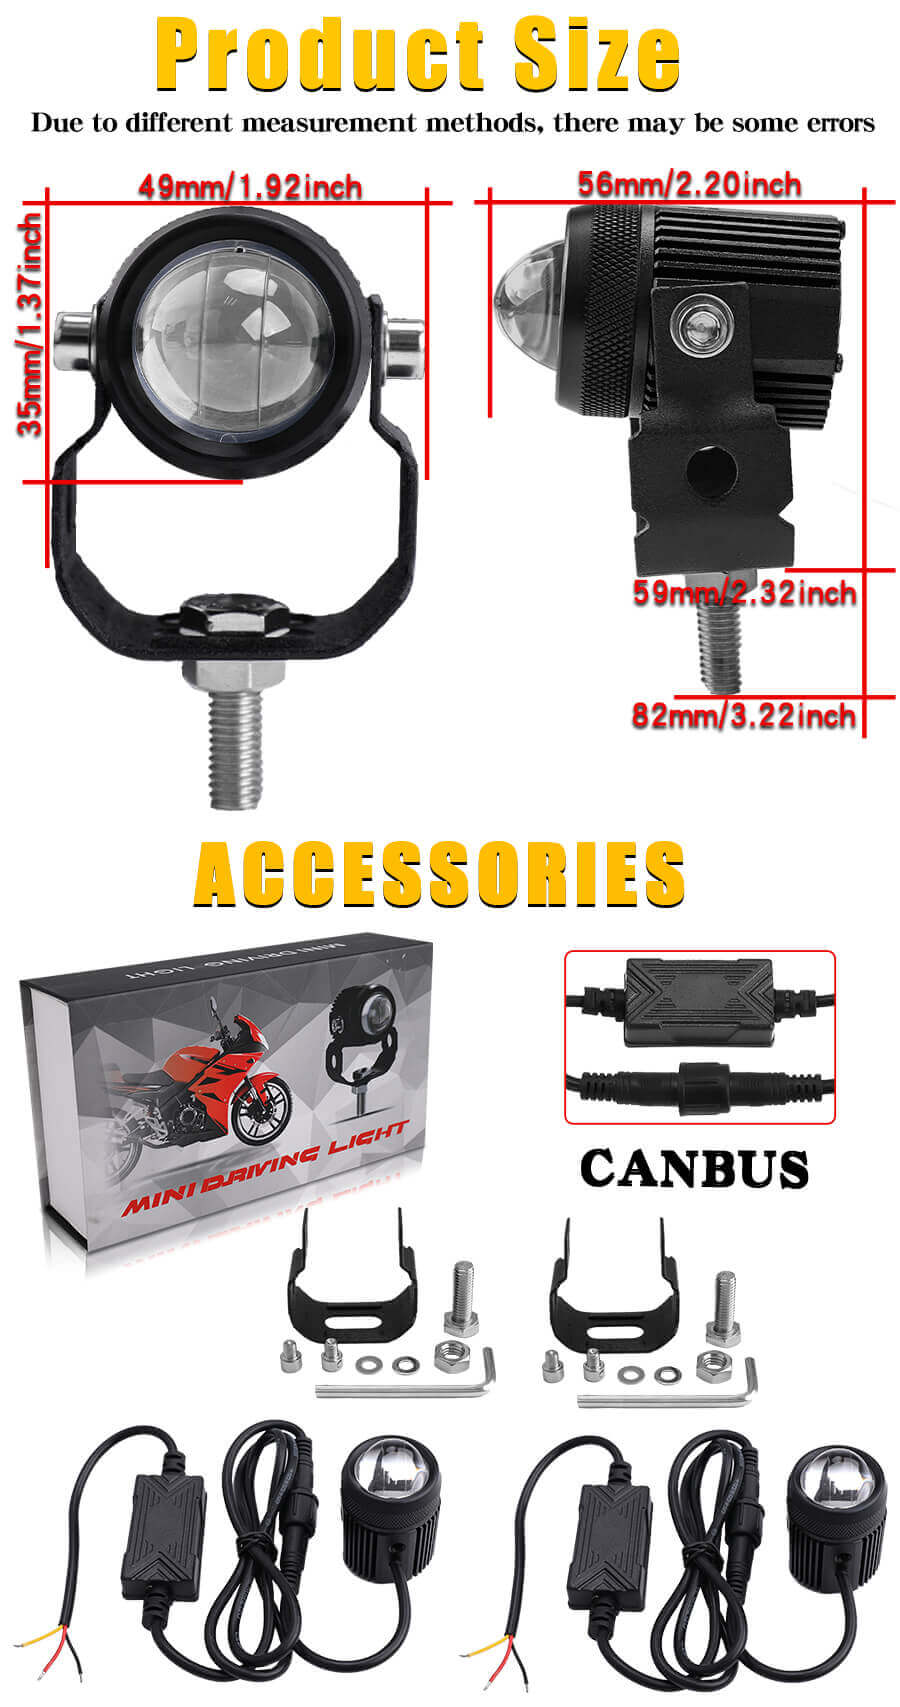 External-Dual-Colors-Big-Lens-Led-Auxiliary-Light-for-Motorcycle-JG-993-size